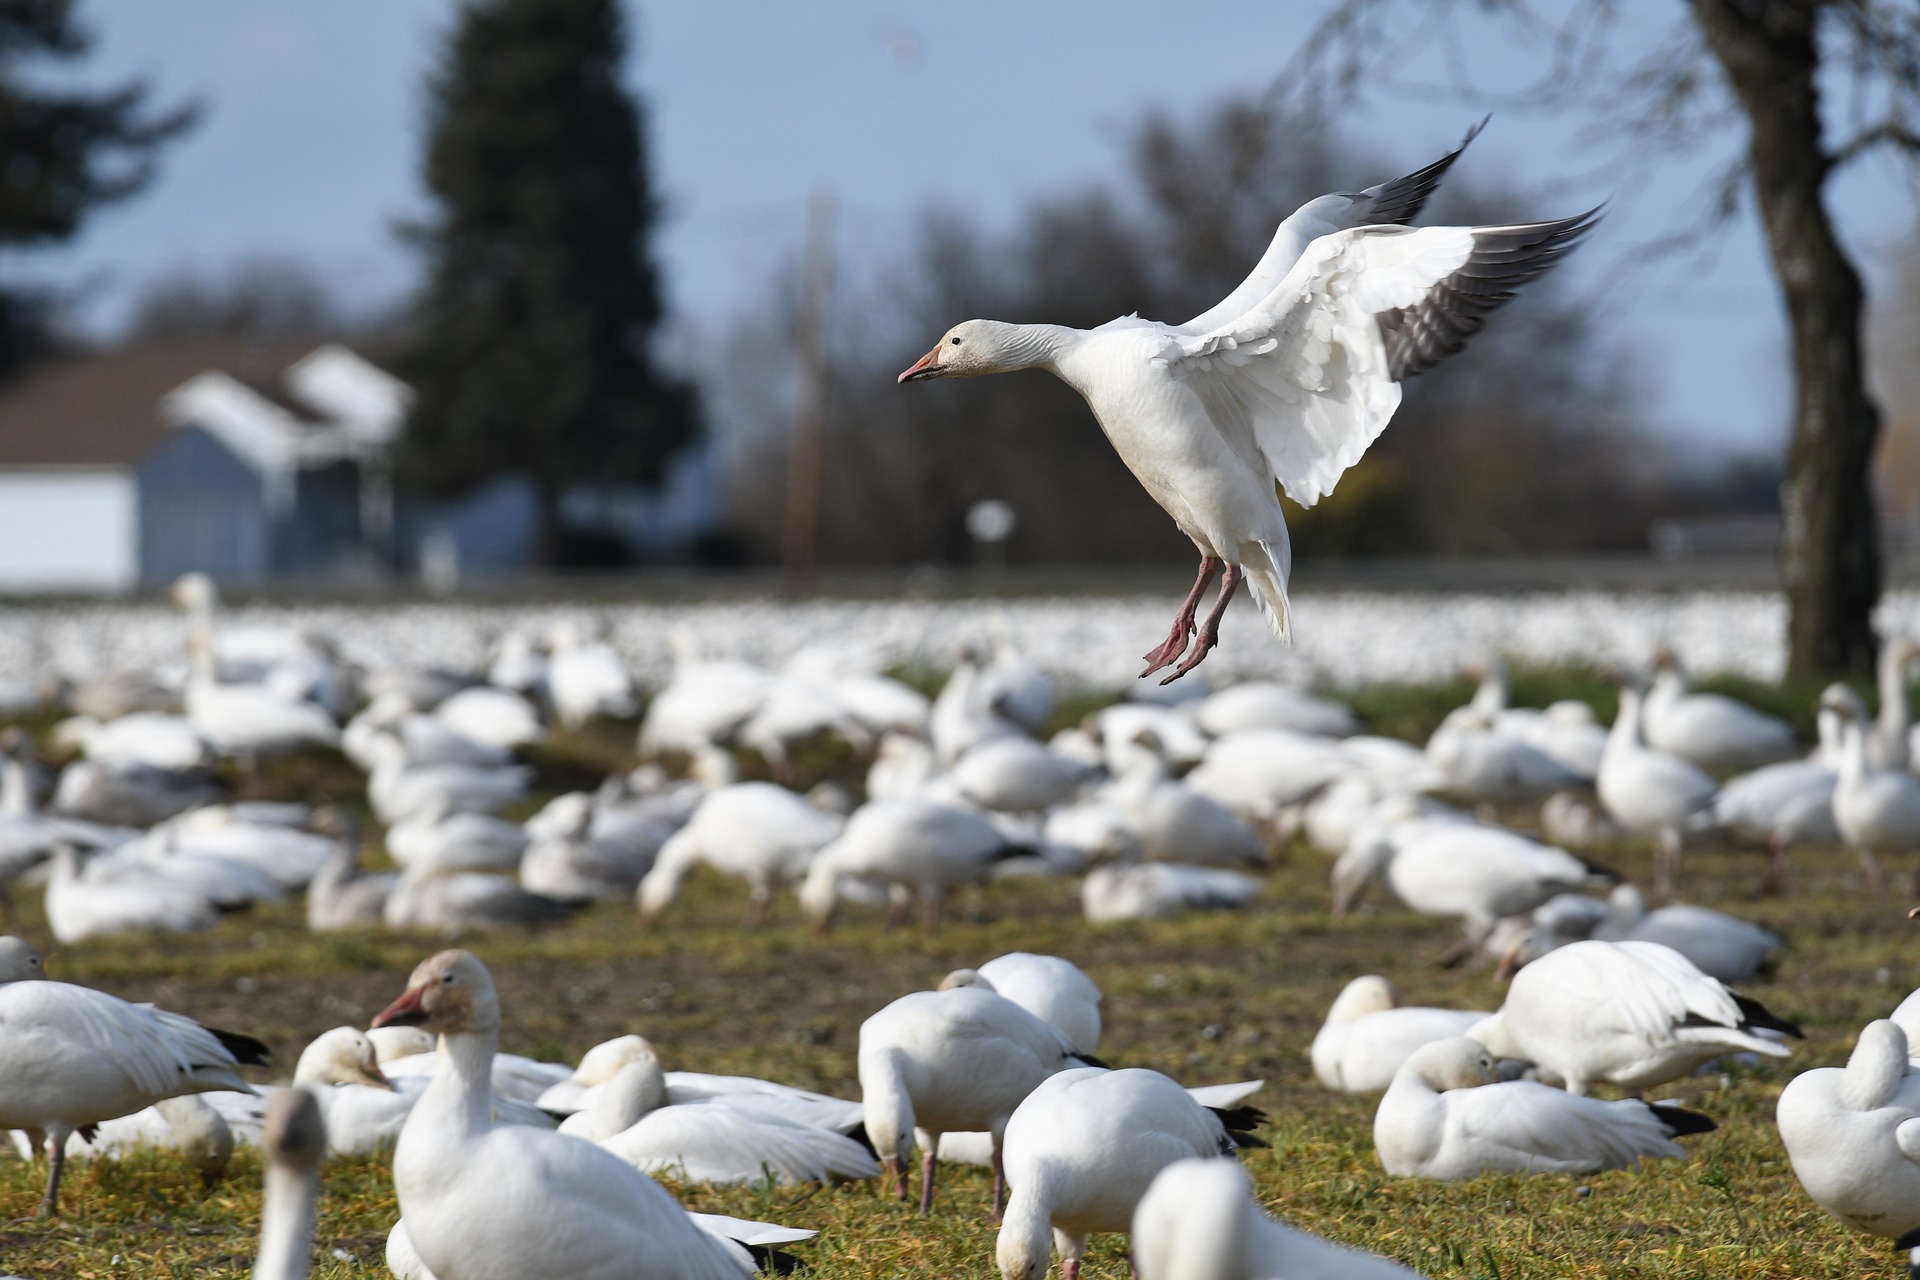 Fewere snow geese are wintering in Texas.